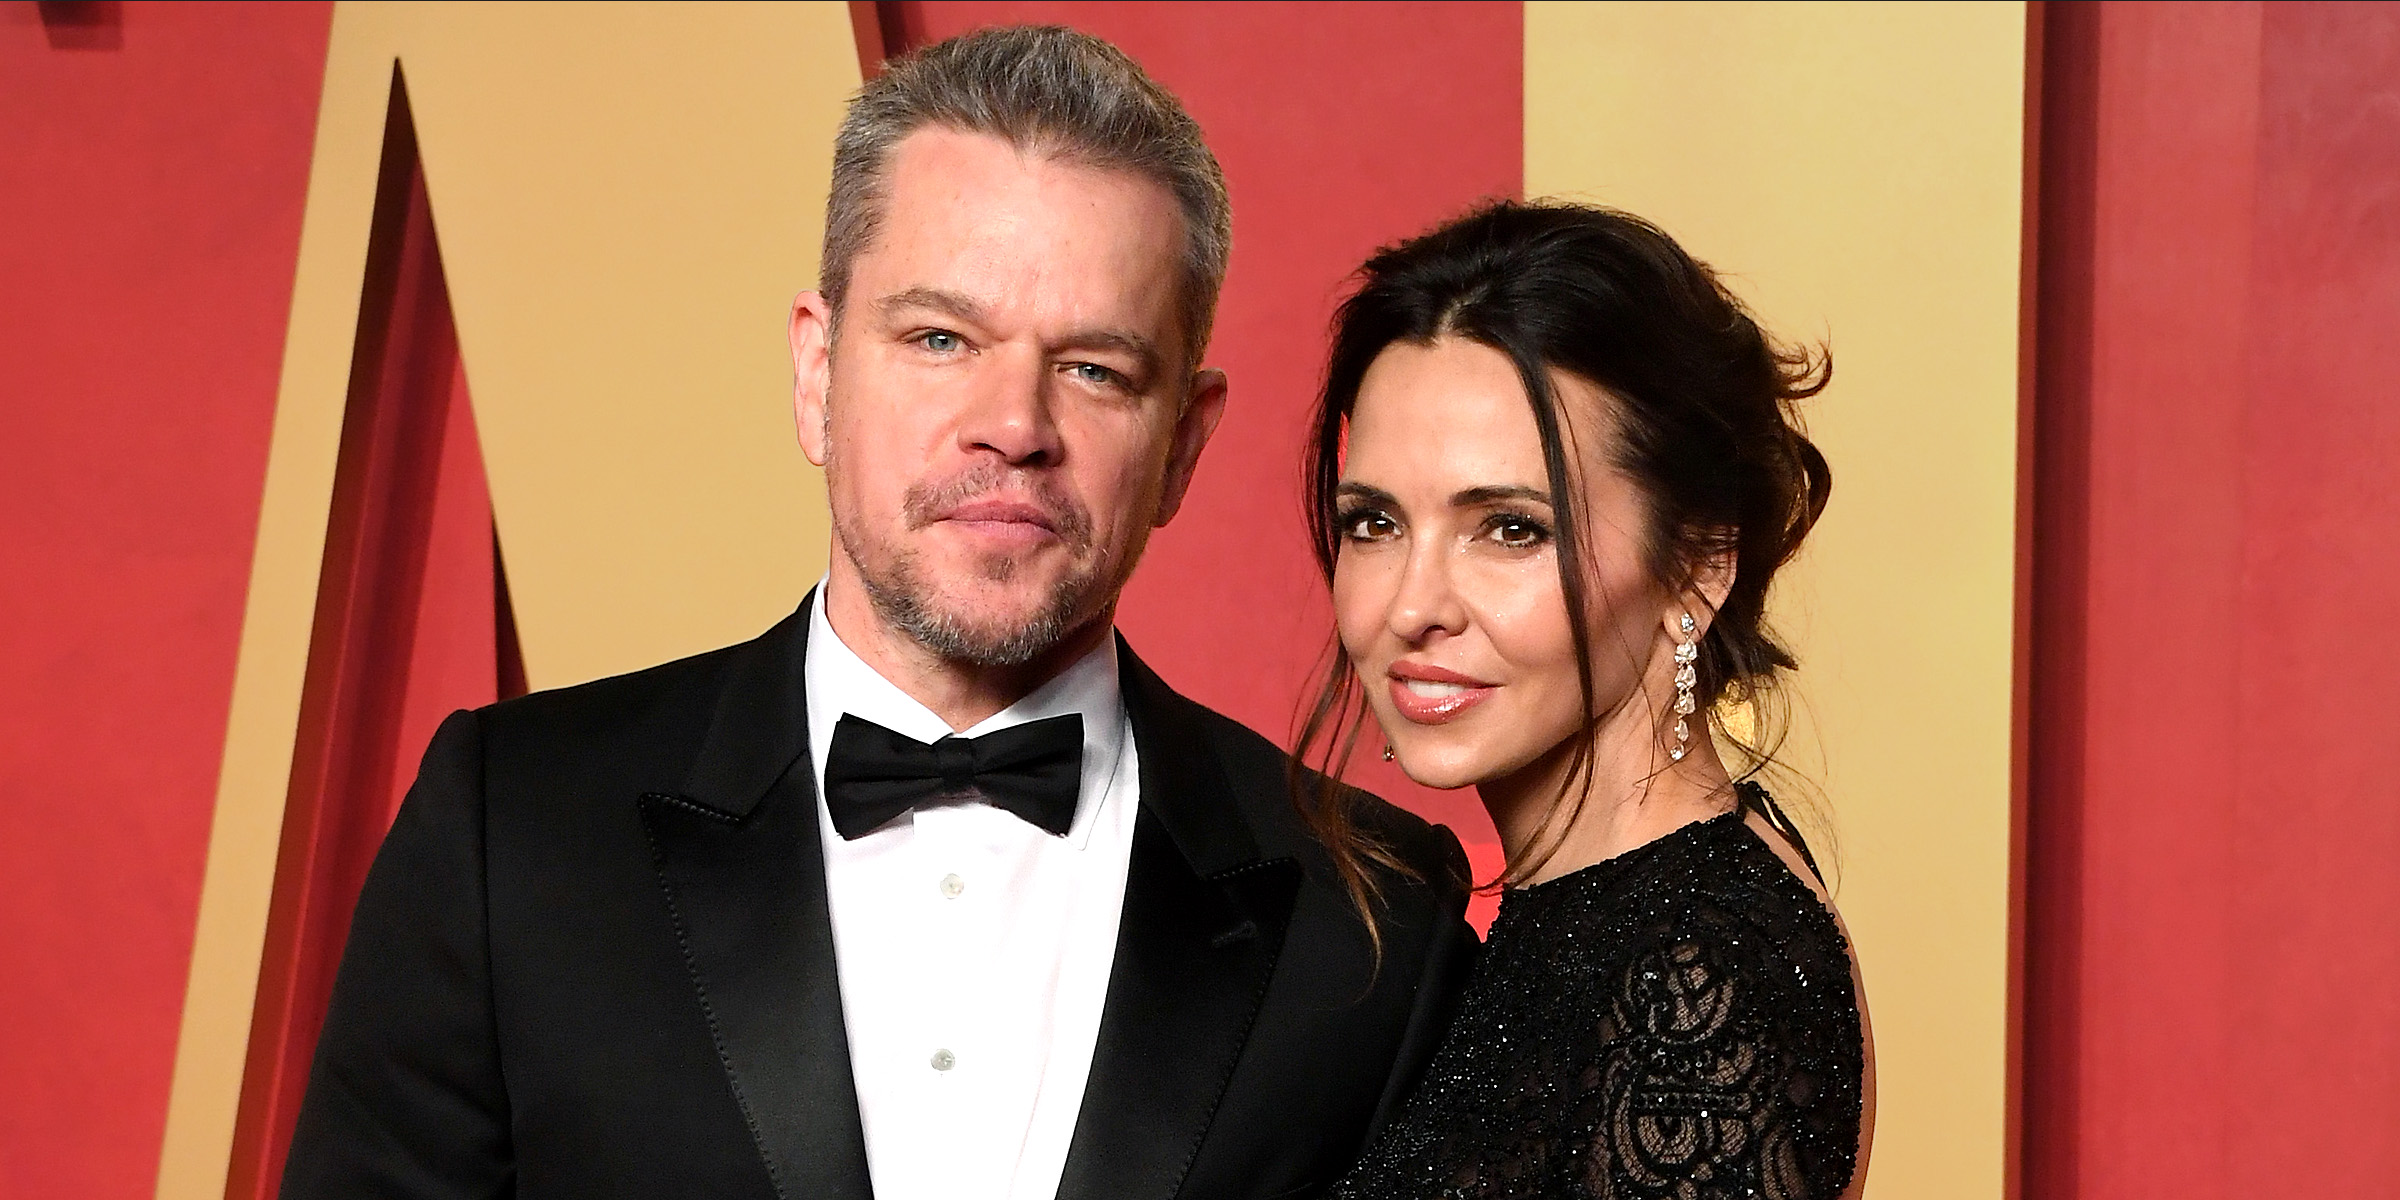 Matt Damon and his wife Luciana Barroso | Source: Getty Images